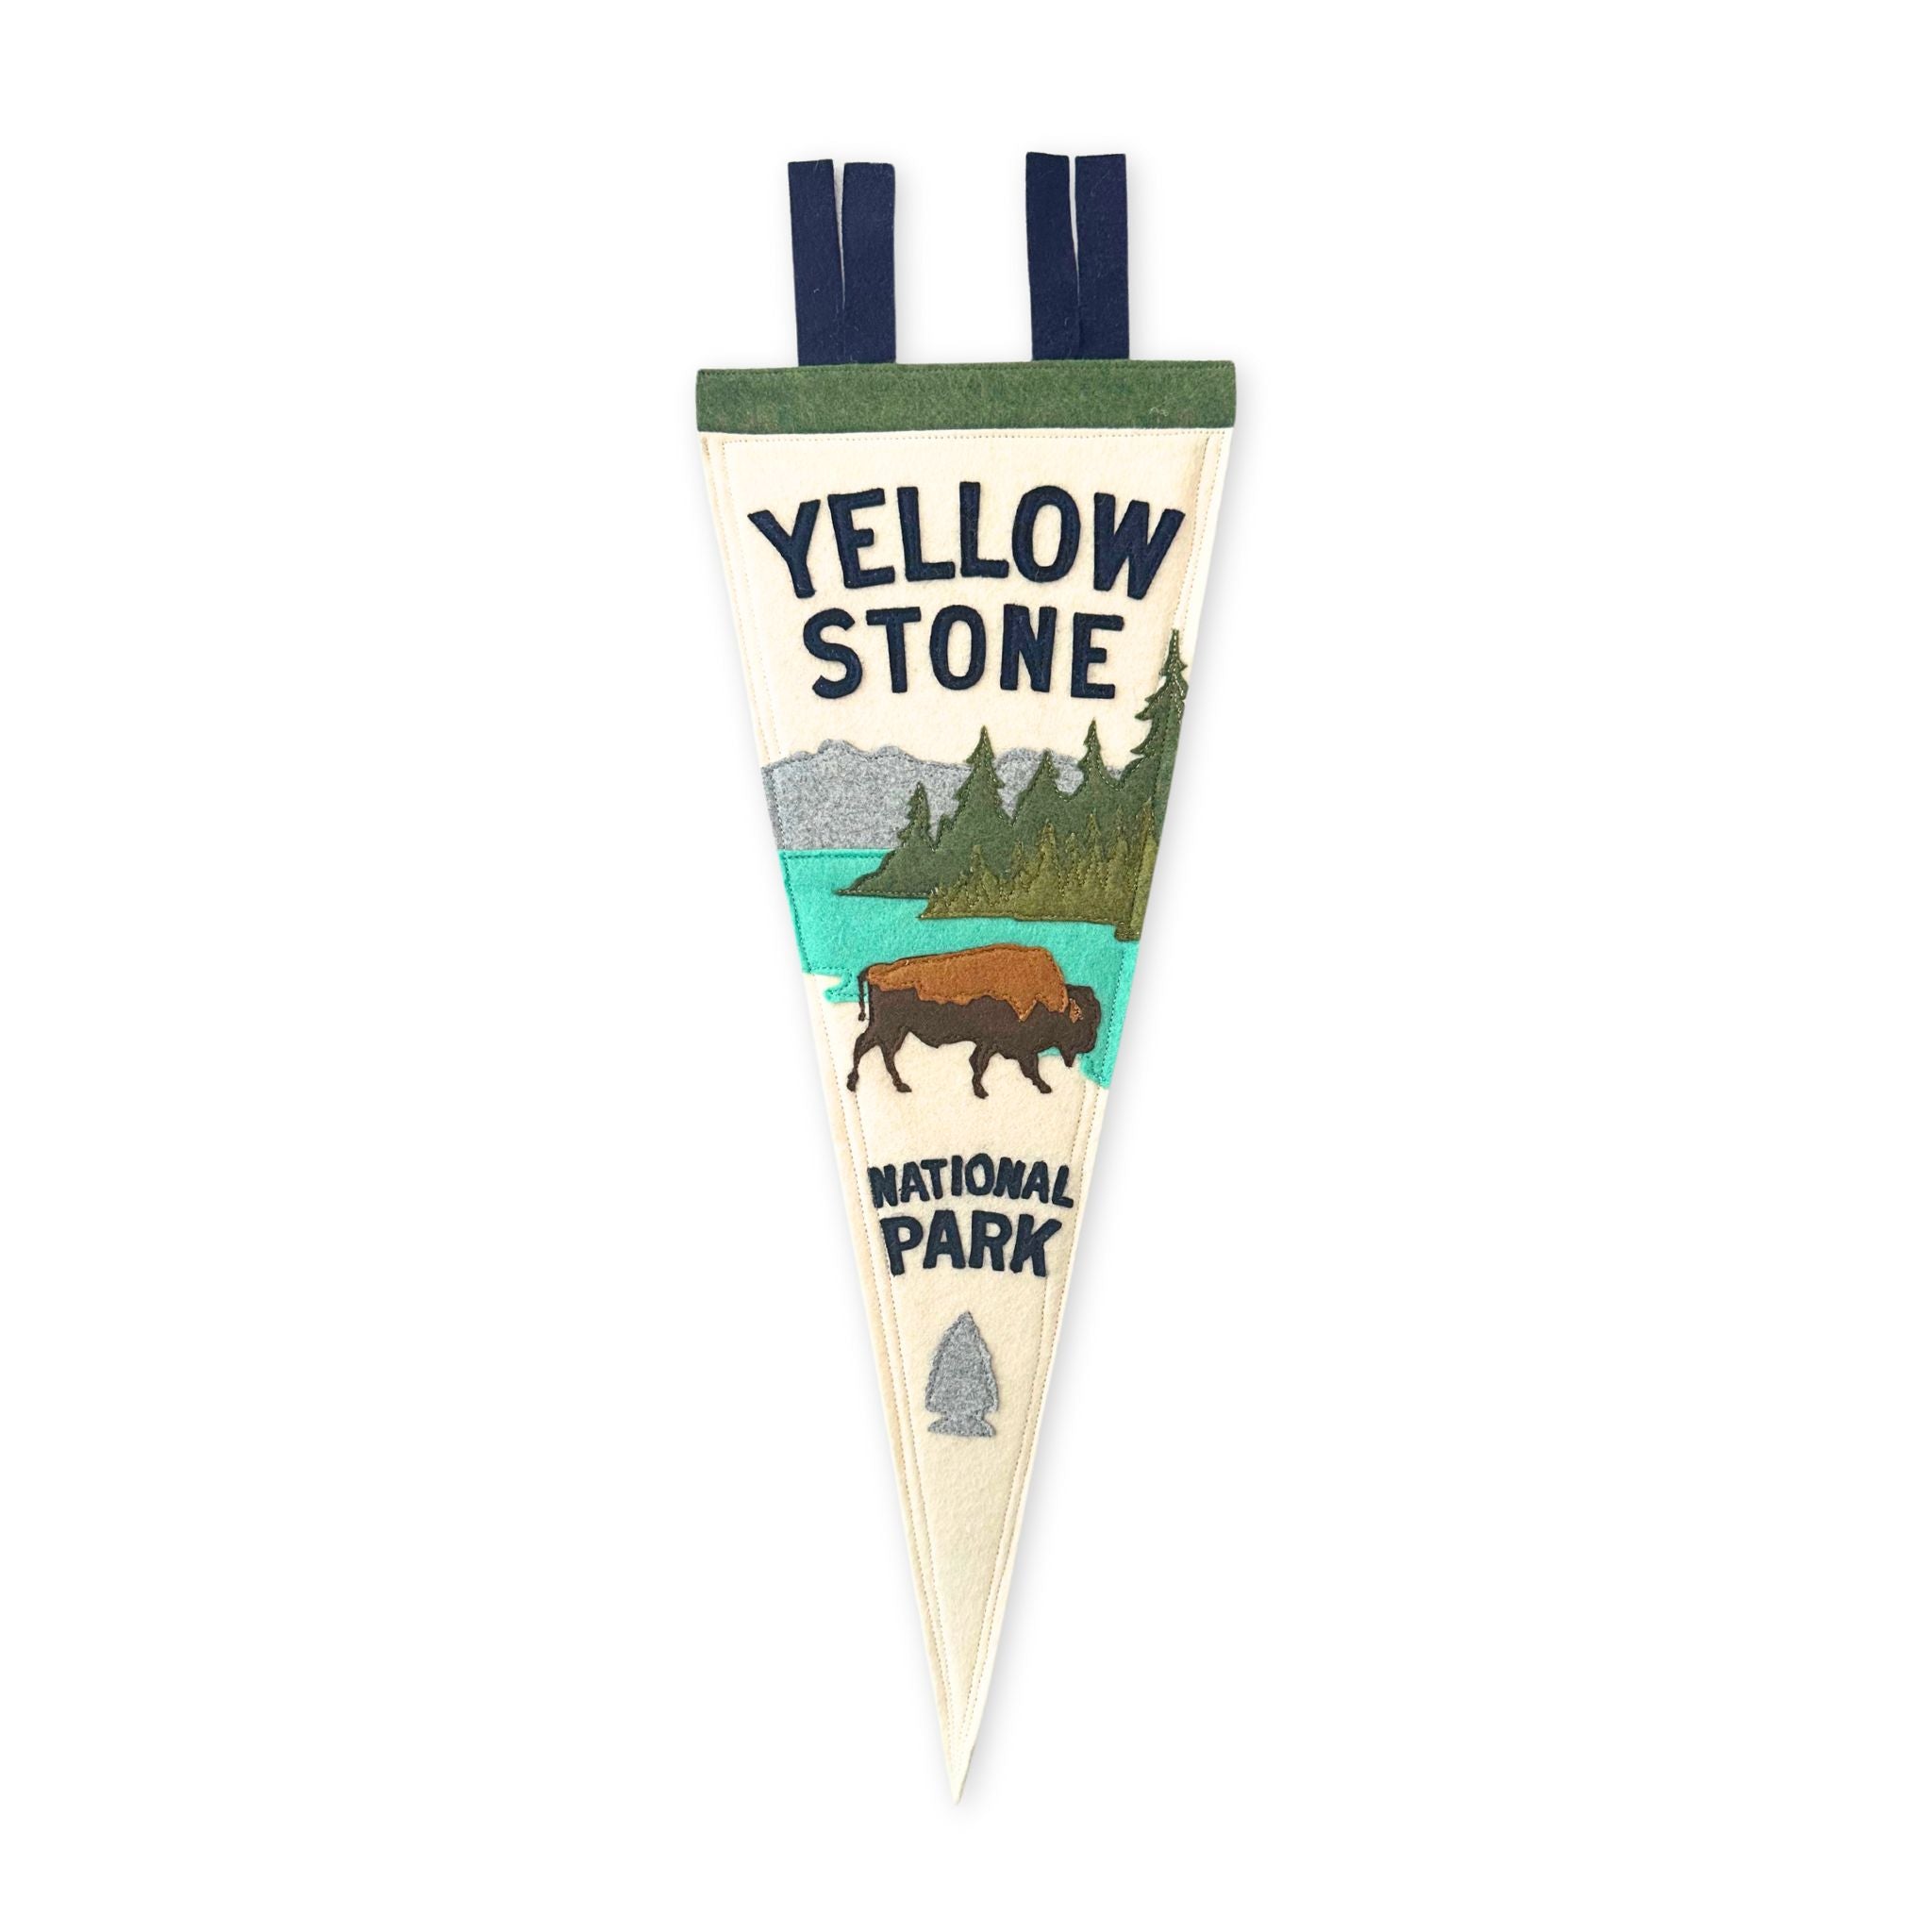 Yellowstone National Park Bison Pennant